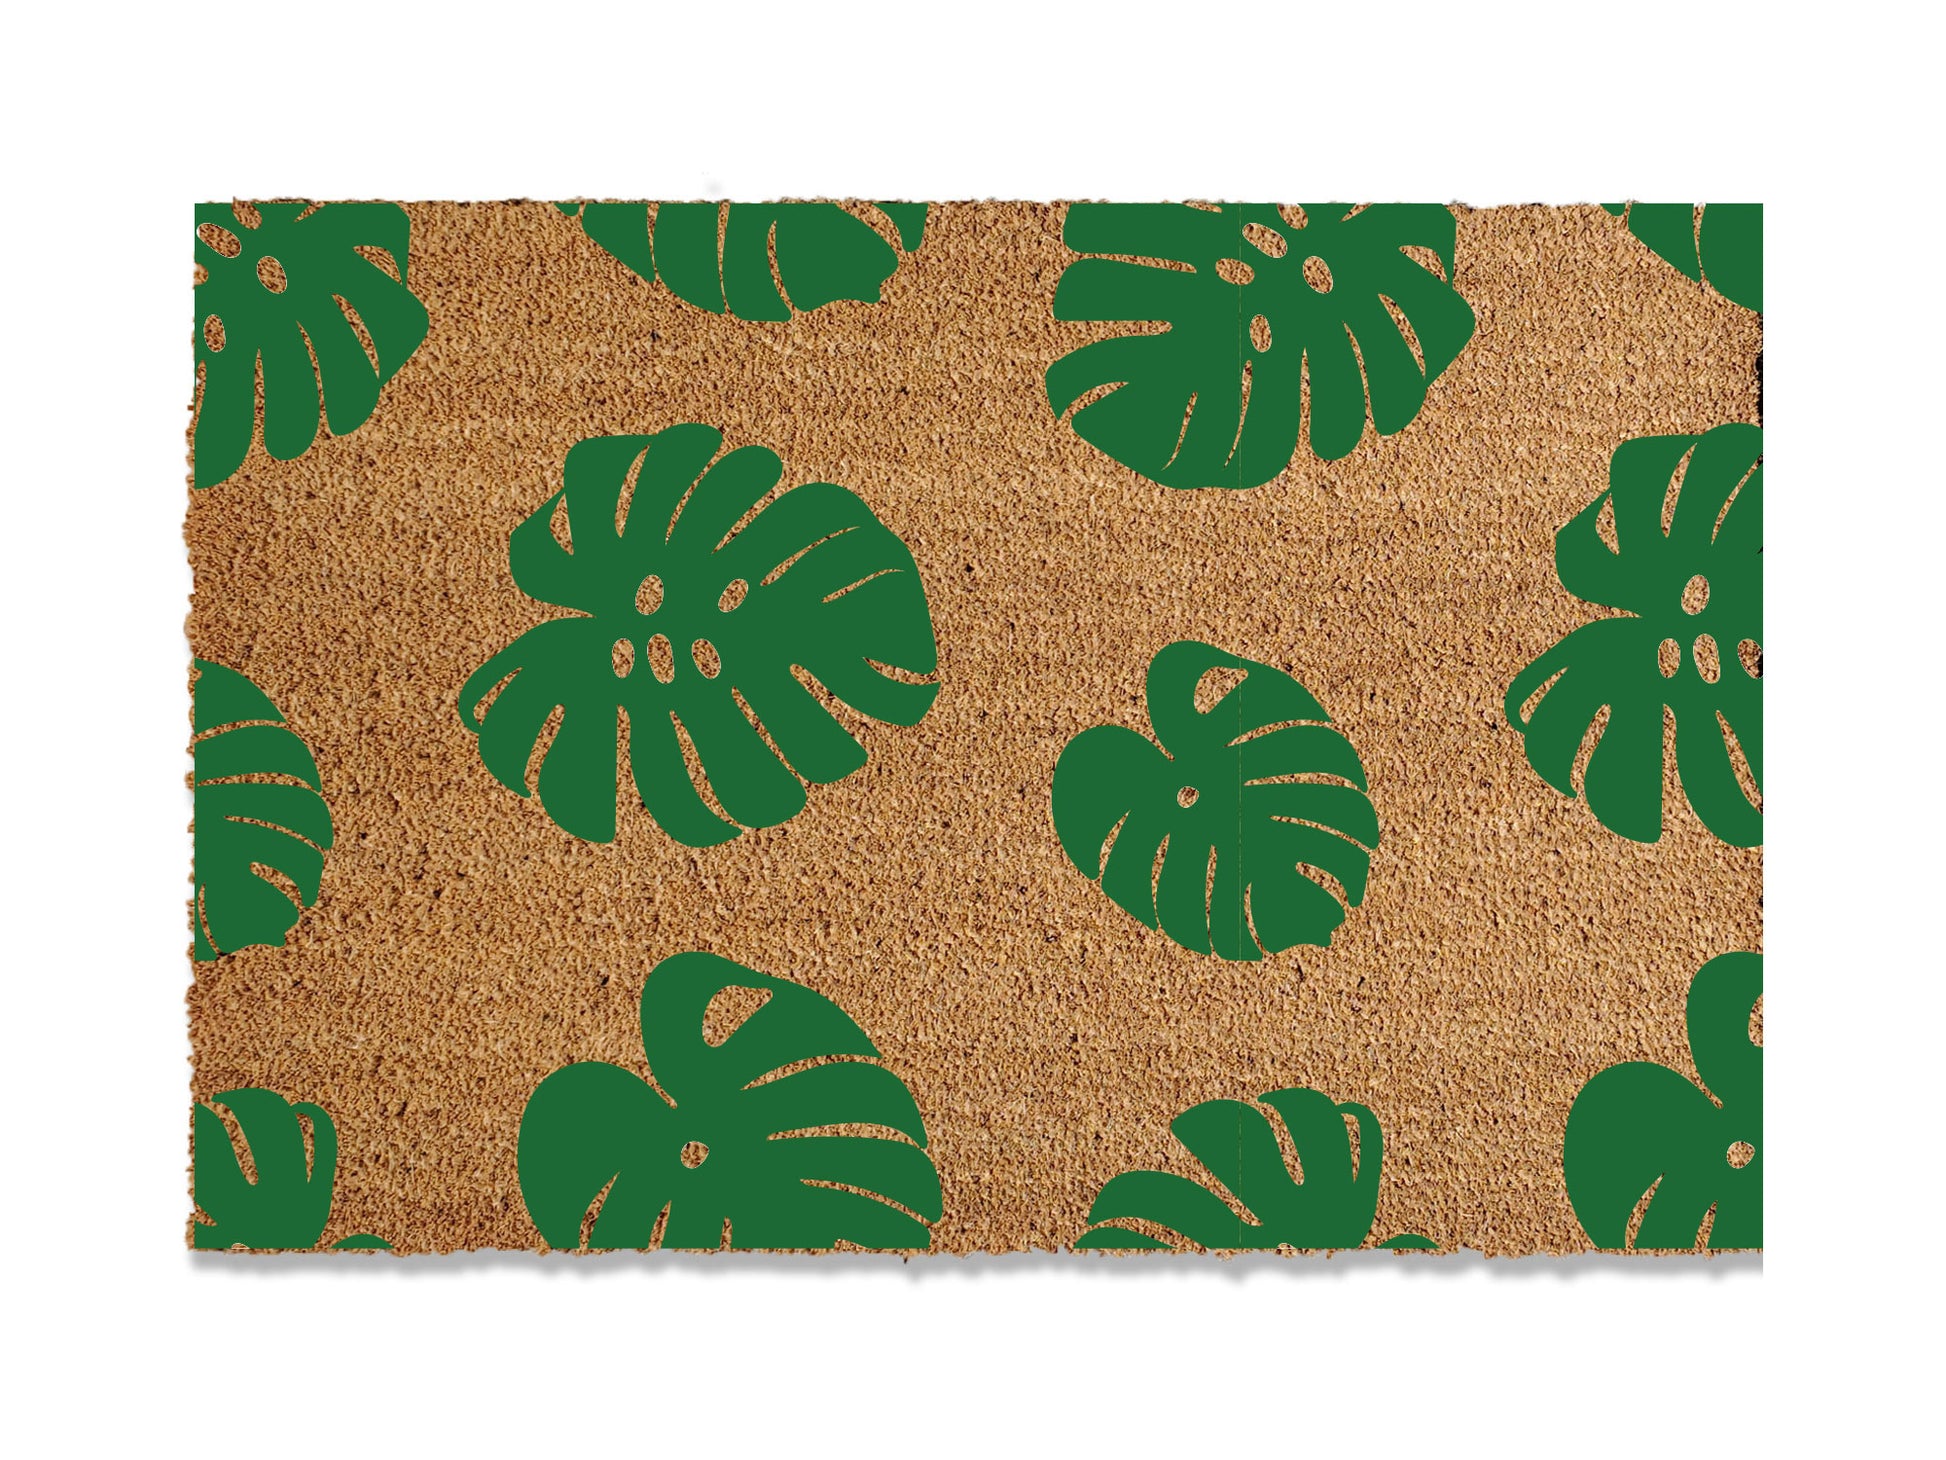 Transform your entrance with our coir doormat showcasing an all-over monstera leaf pattern. The perfect touch for a beach or tropical vibe, this stylish mat is available in multiple sizes and colors. Beyond its aesthetic appeal, it excels at trapping dirt, making it a functional and fashionable addition to enhance your entryway.